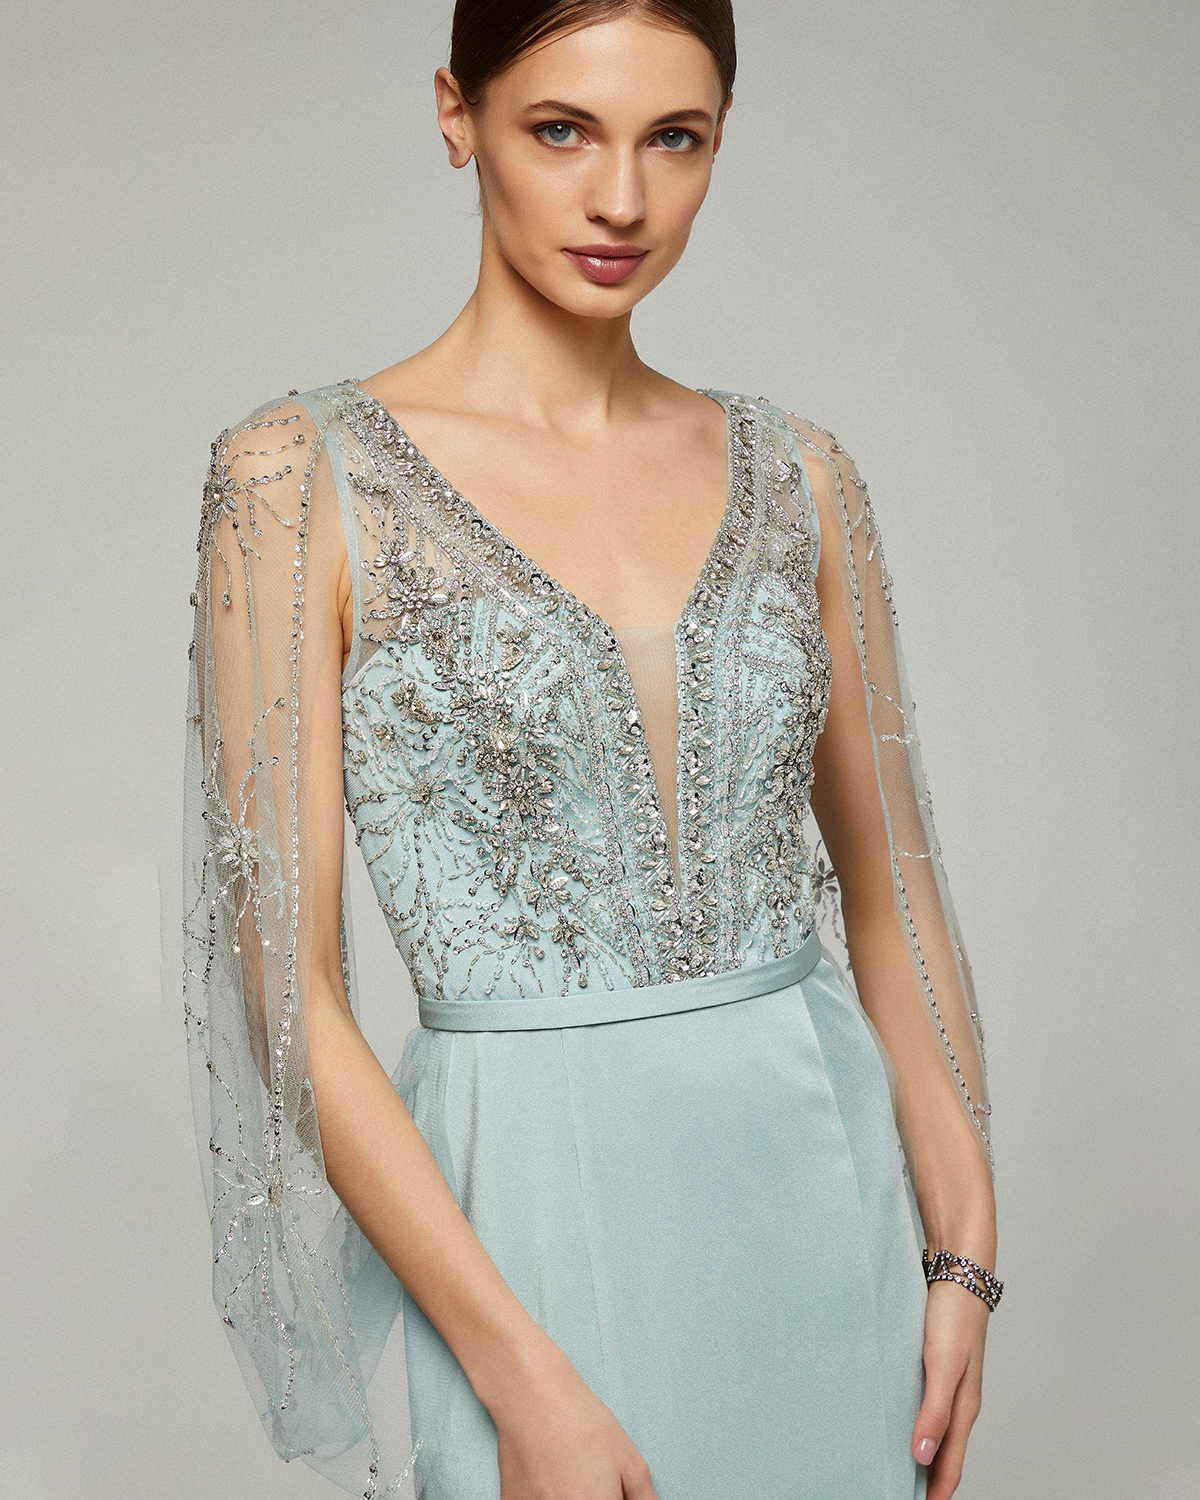 Classic Dresses / Long evening fully beaded dress with beaded cape